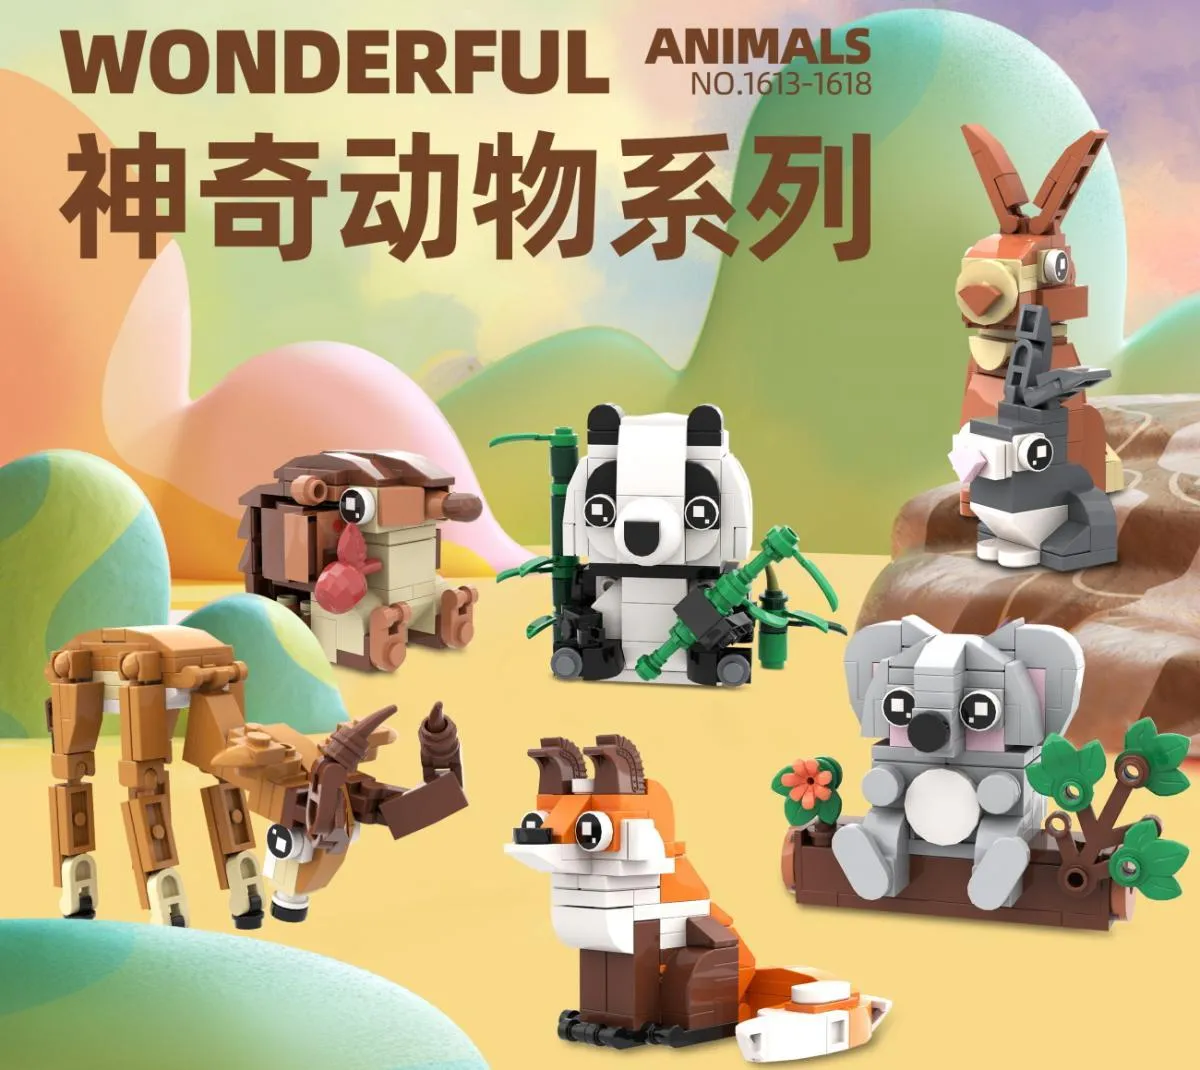 Land animals - Set/package of 6 different animals with displays Gallery